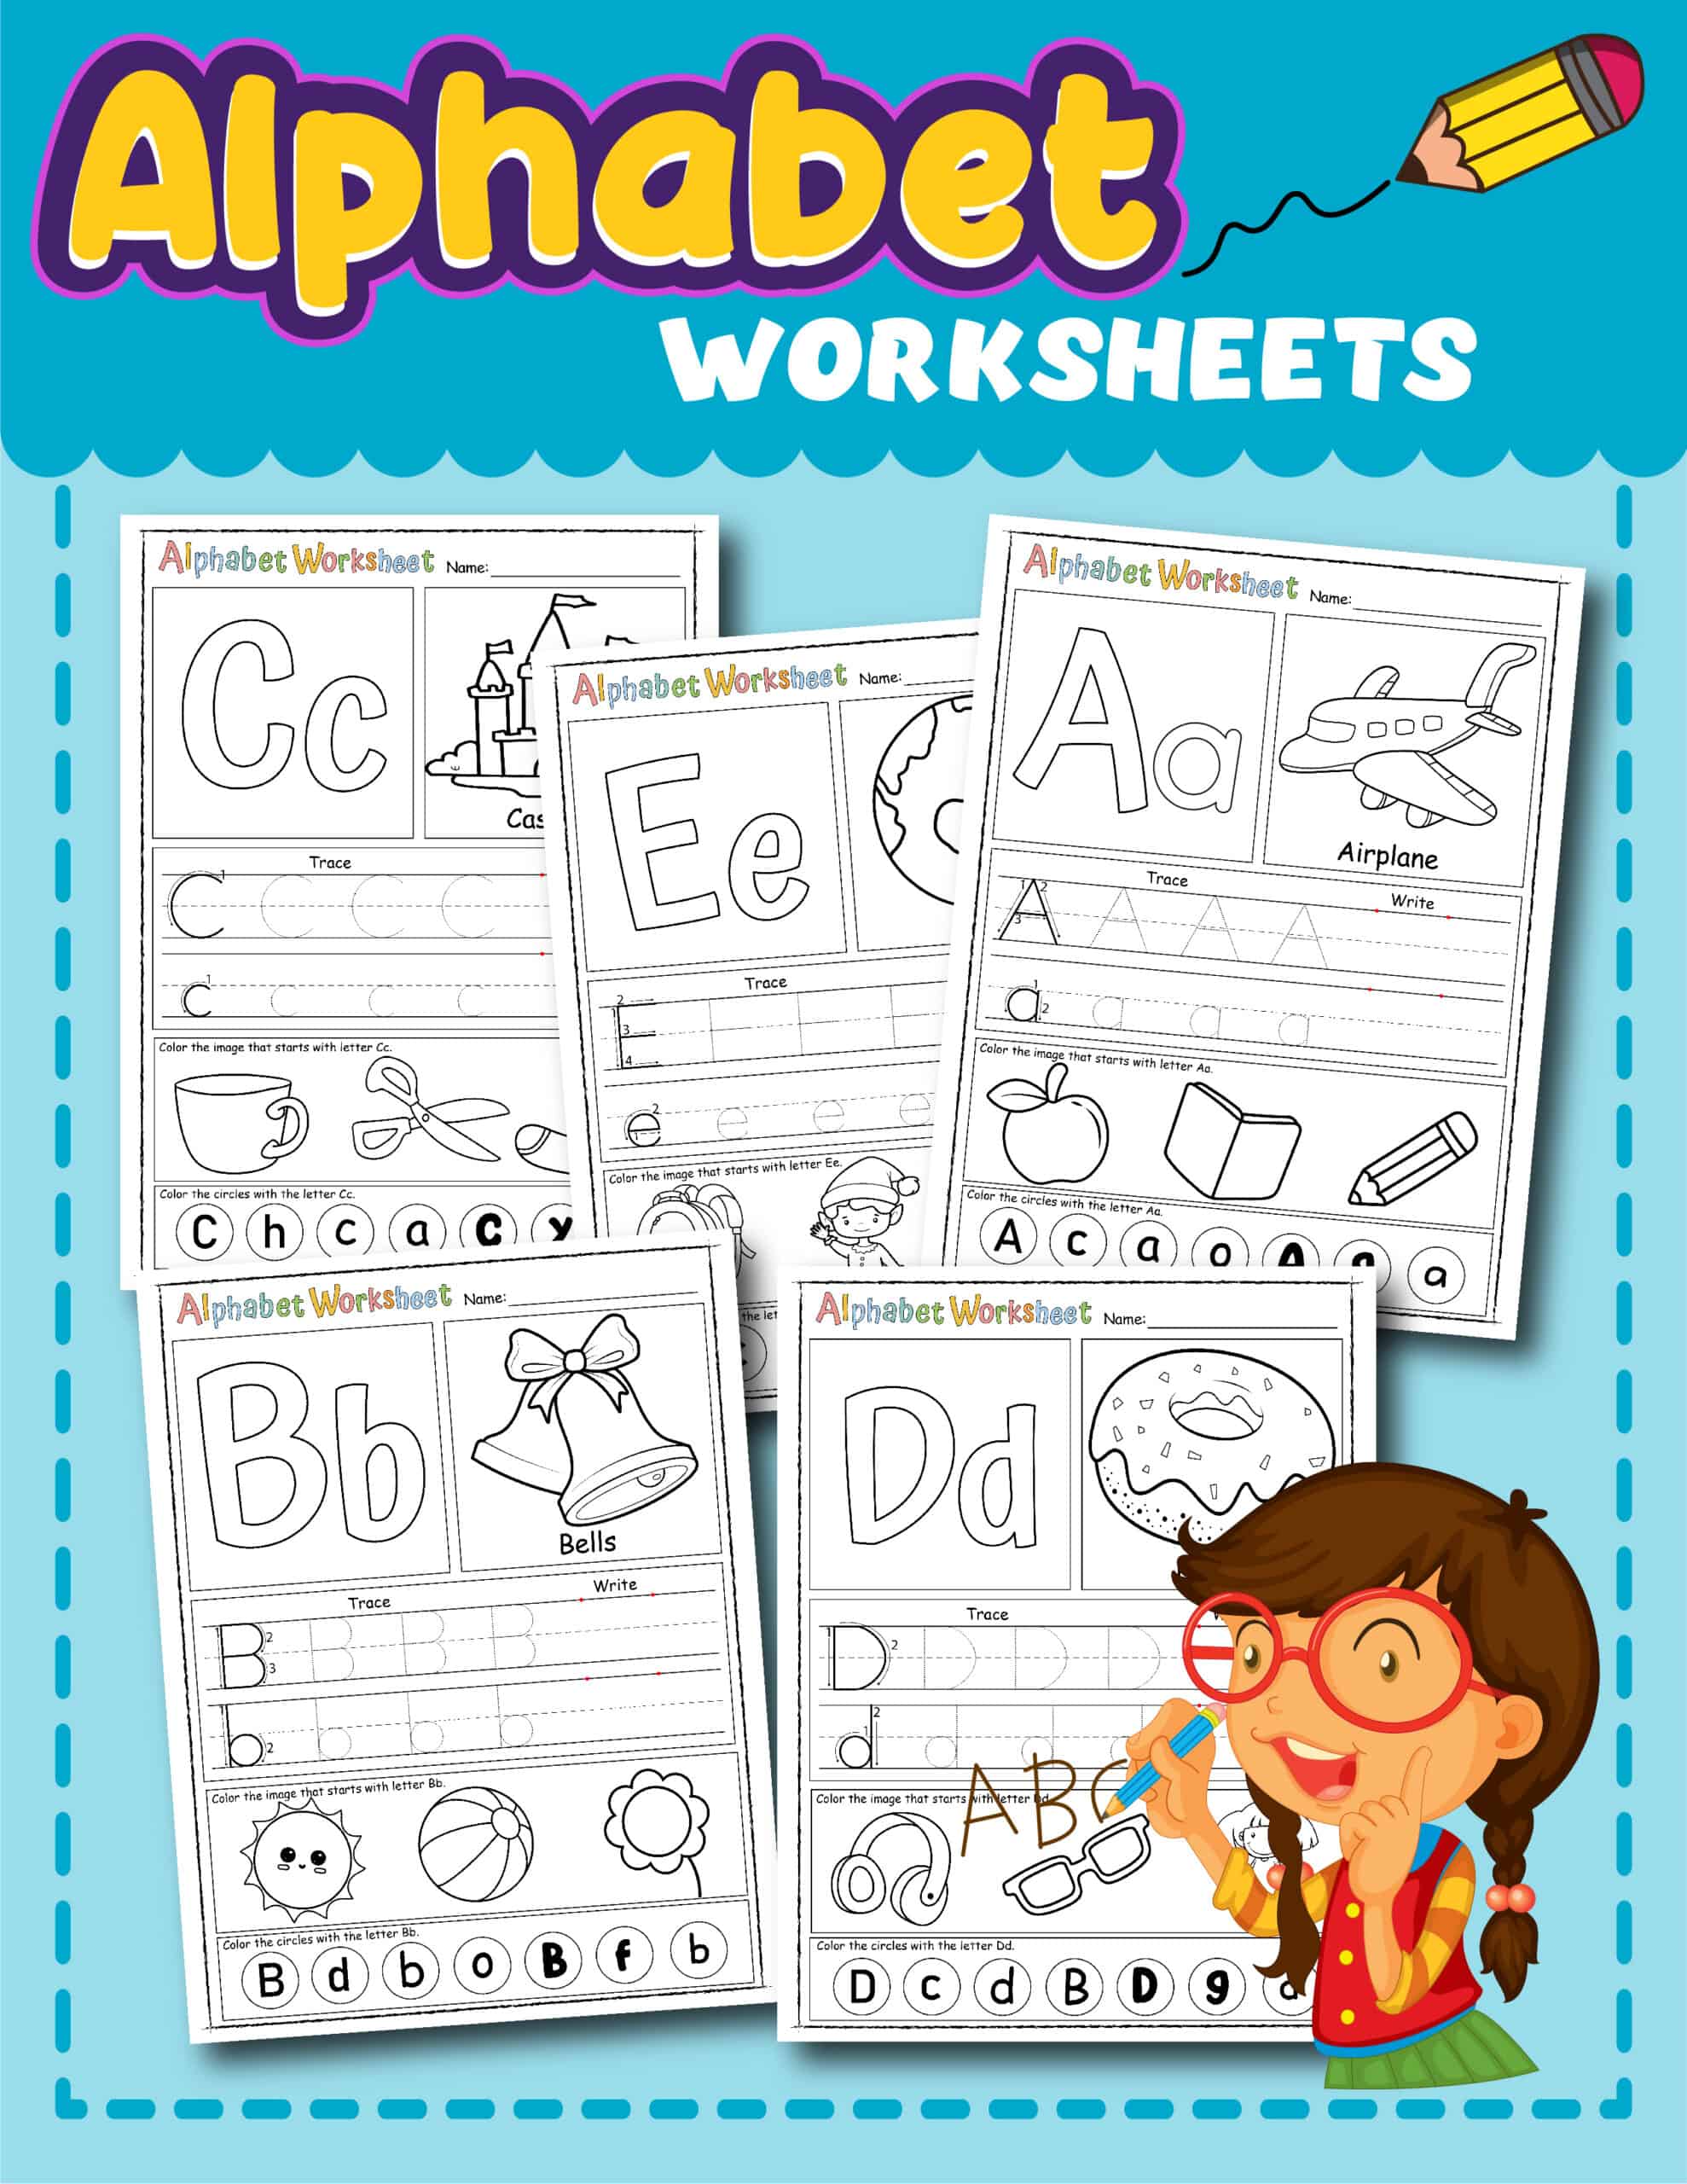 Alphabet Review Worksheets